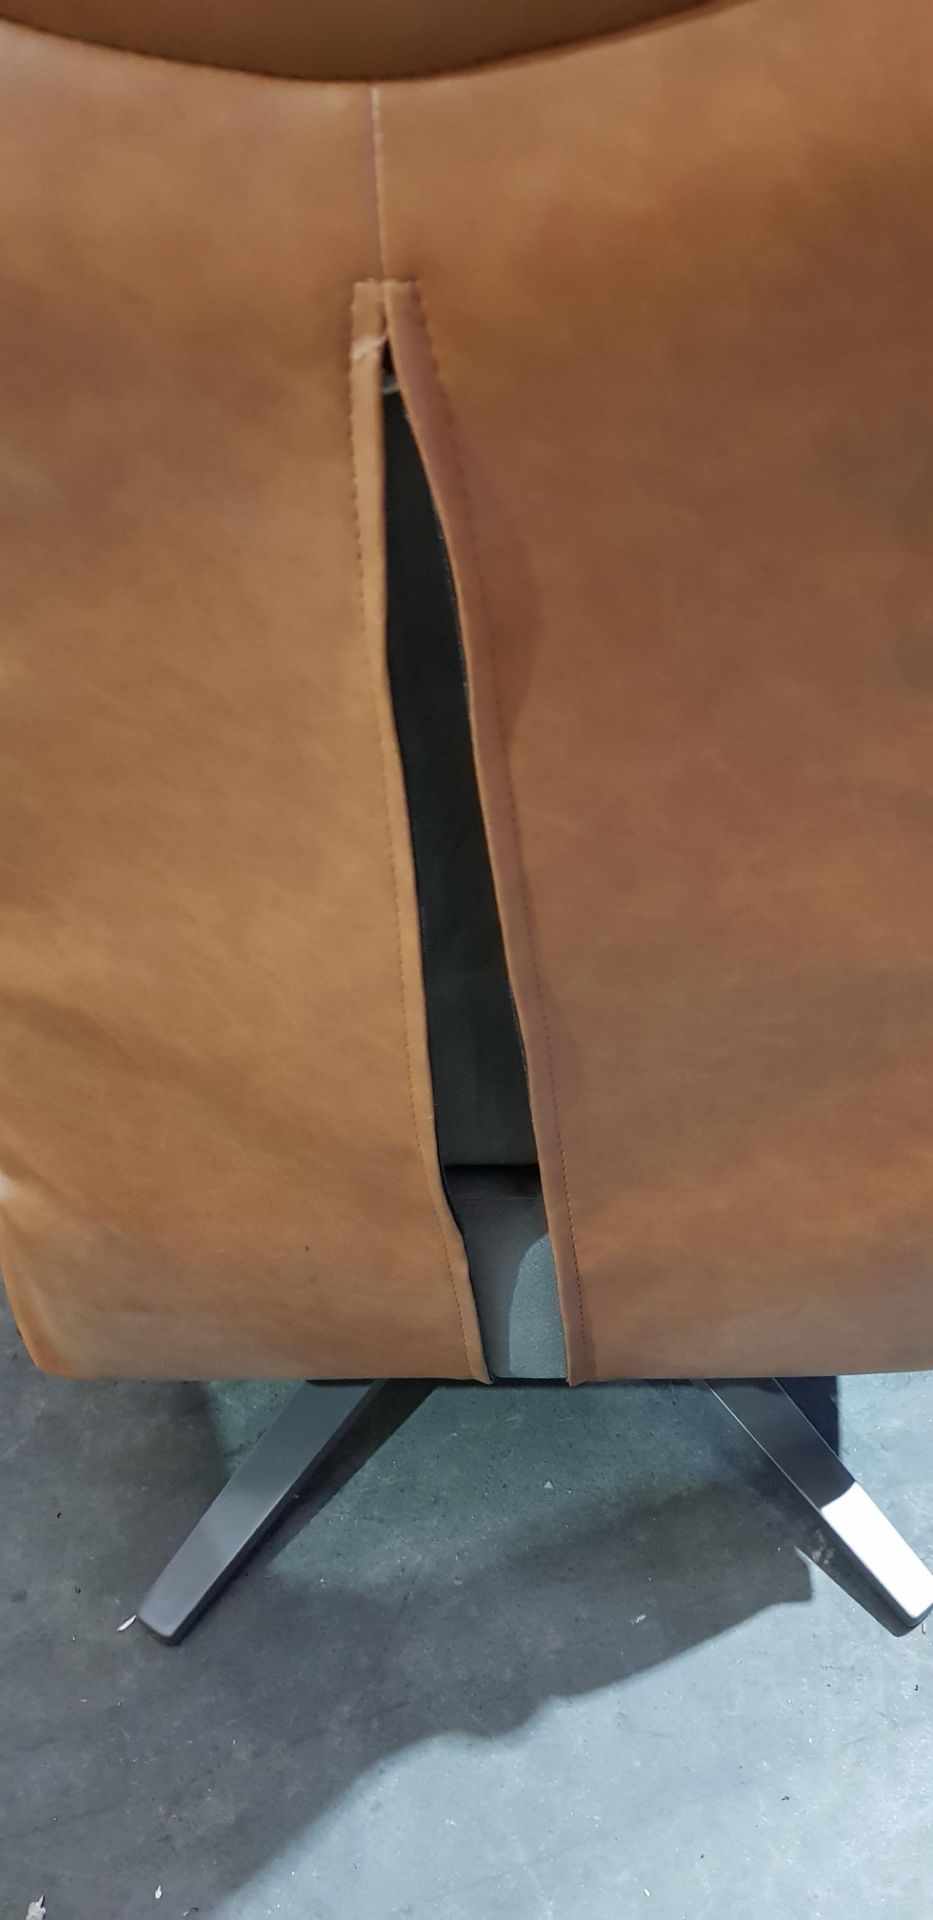 1 X SINGLE SEATER LEATHER ELECTRIC CHAIR IN TAN COLOUR - NO CHARGER - POOR CONDITION - CUSTOMER - Image 2 of 2